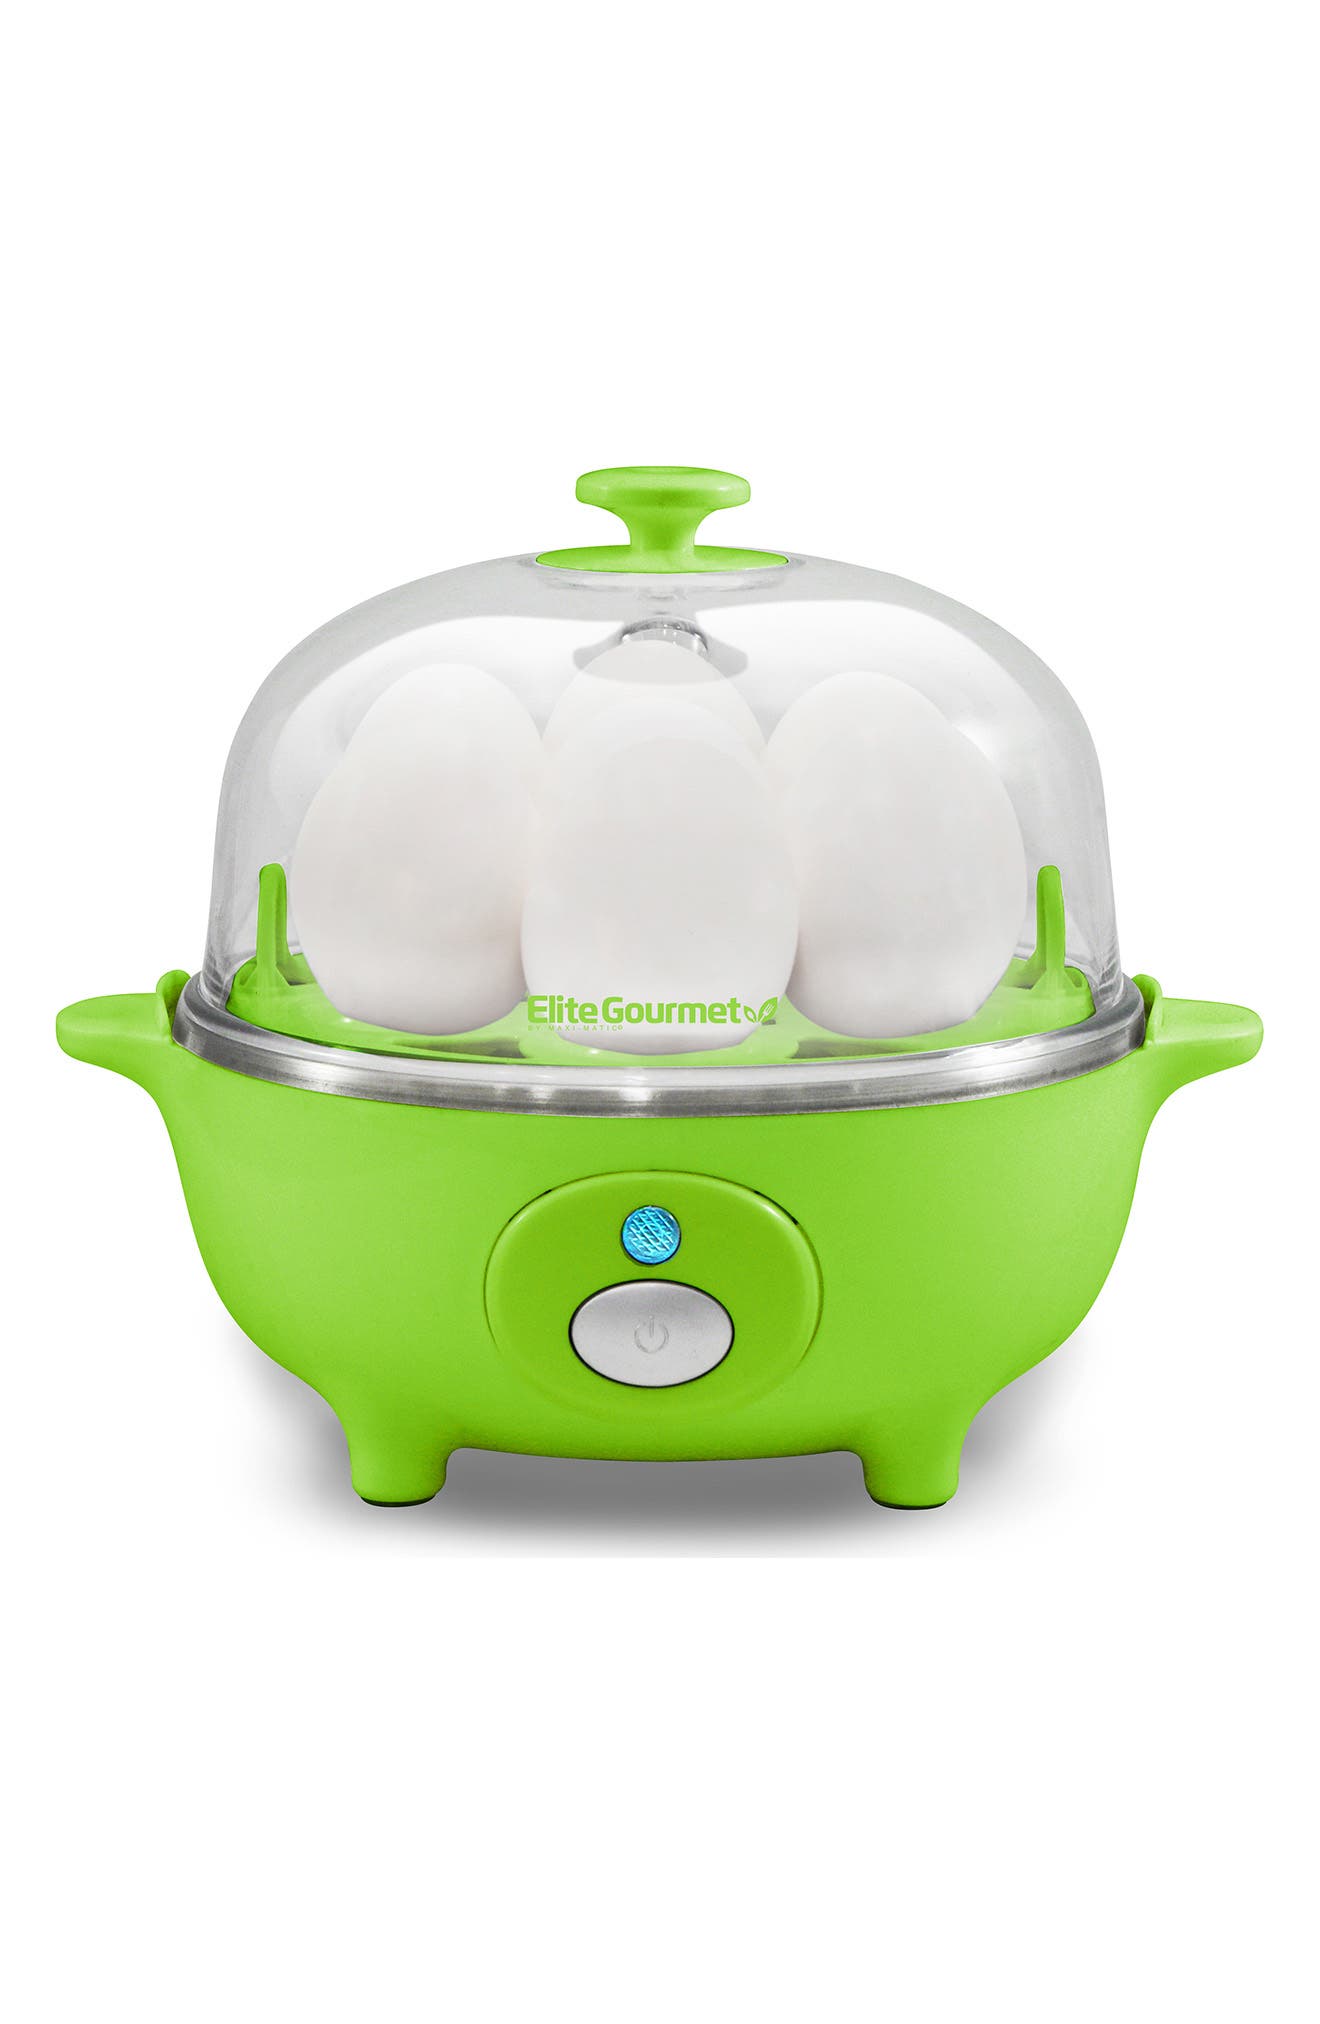 Maxi-matic Elite Cuisine Egc-007g Automatic Easy 7-egg Cooker In Green